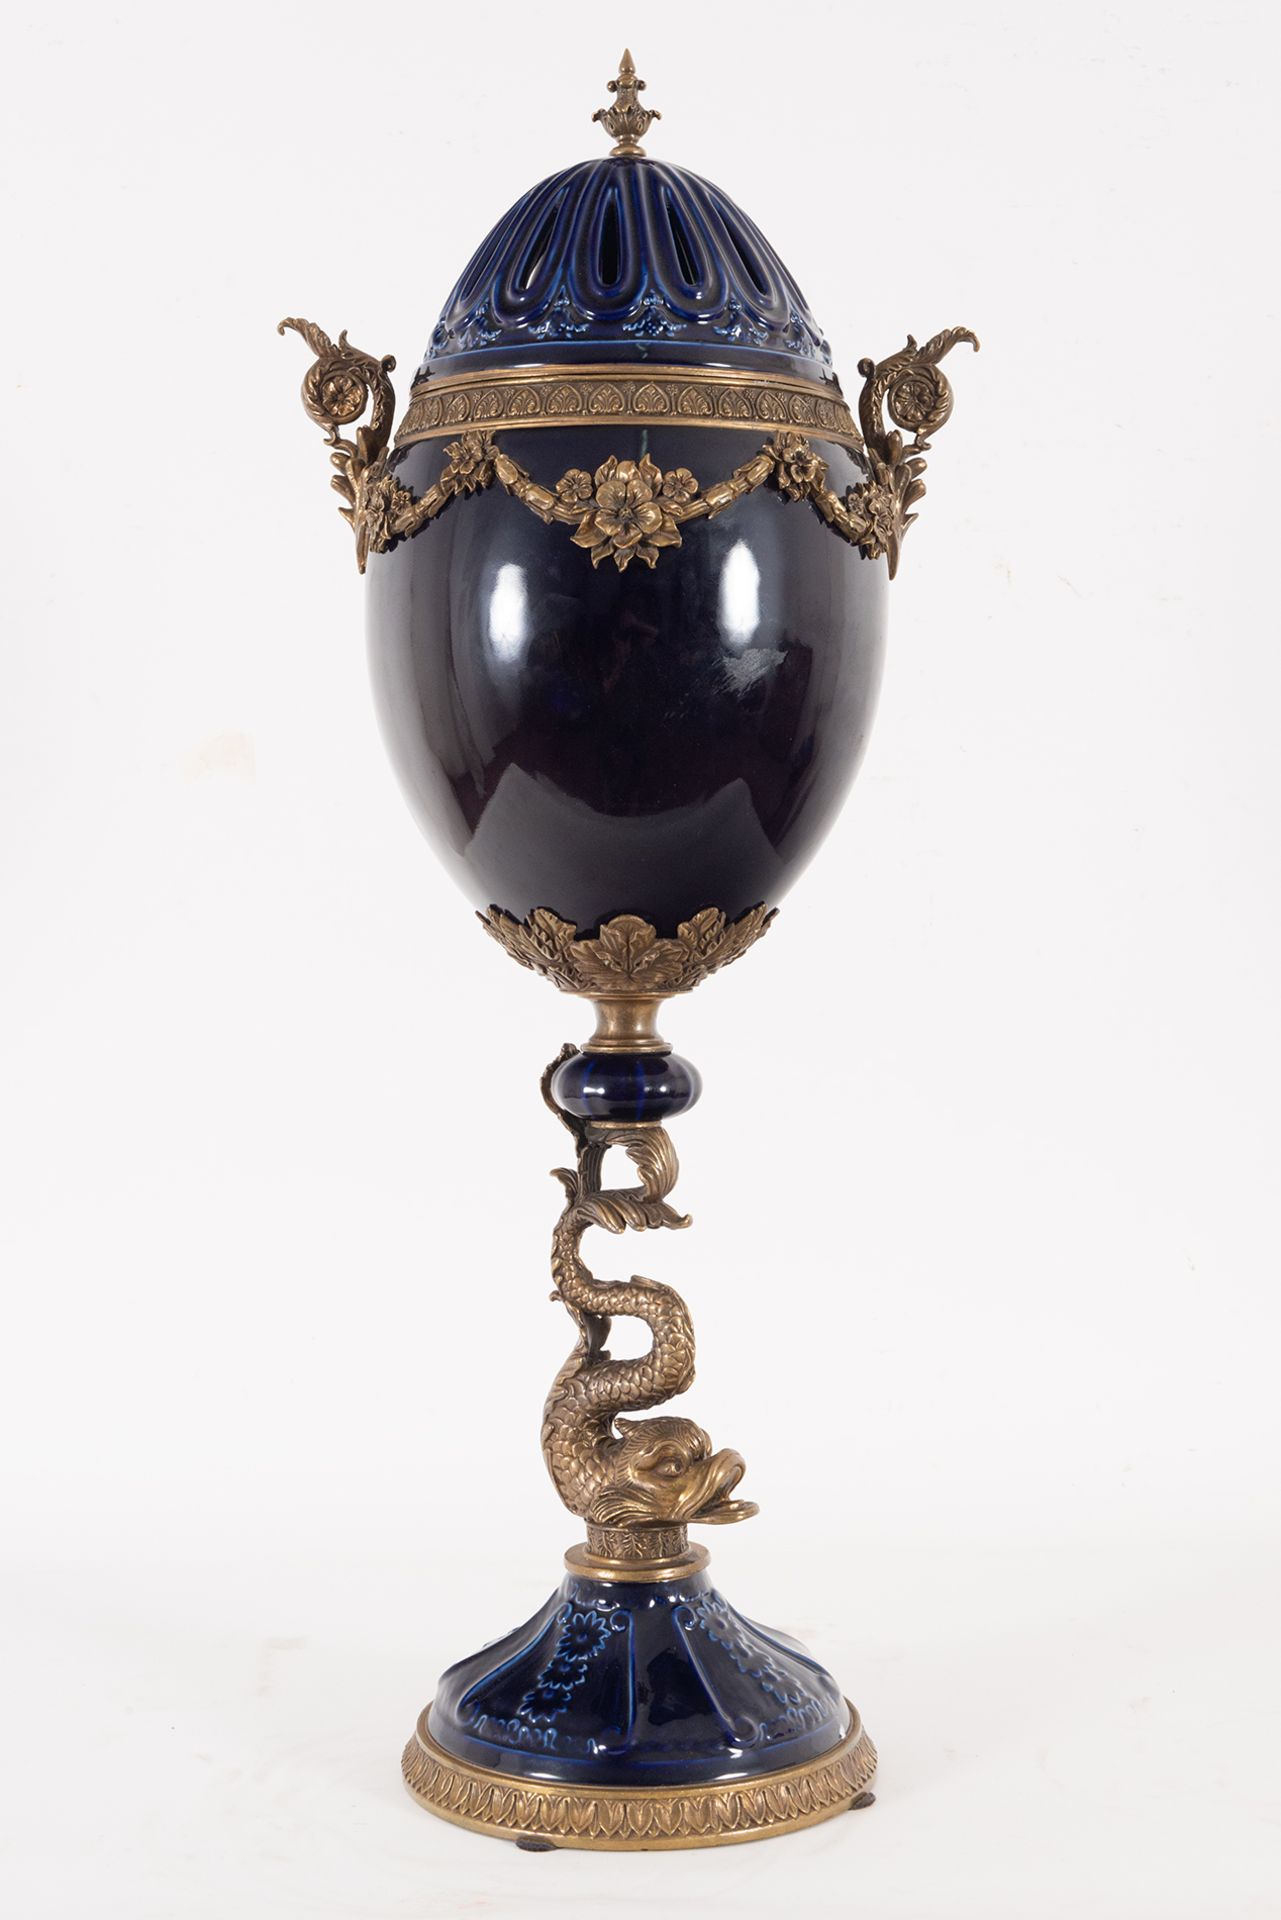 Louis XVI Style Faienza and gilt bronze garniture, 19th-20th century - Image 9 of 9